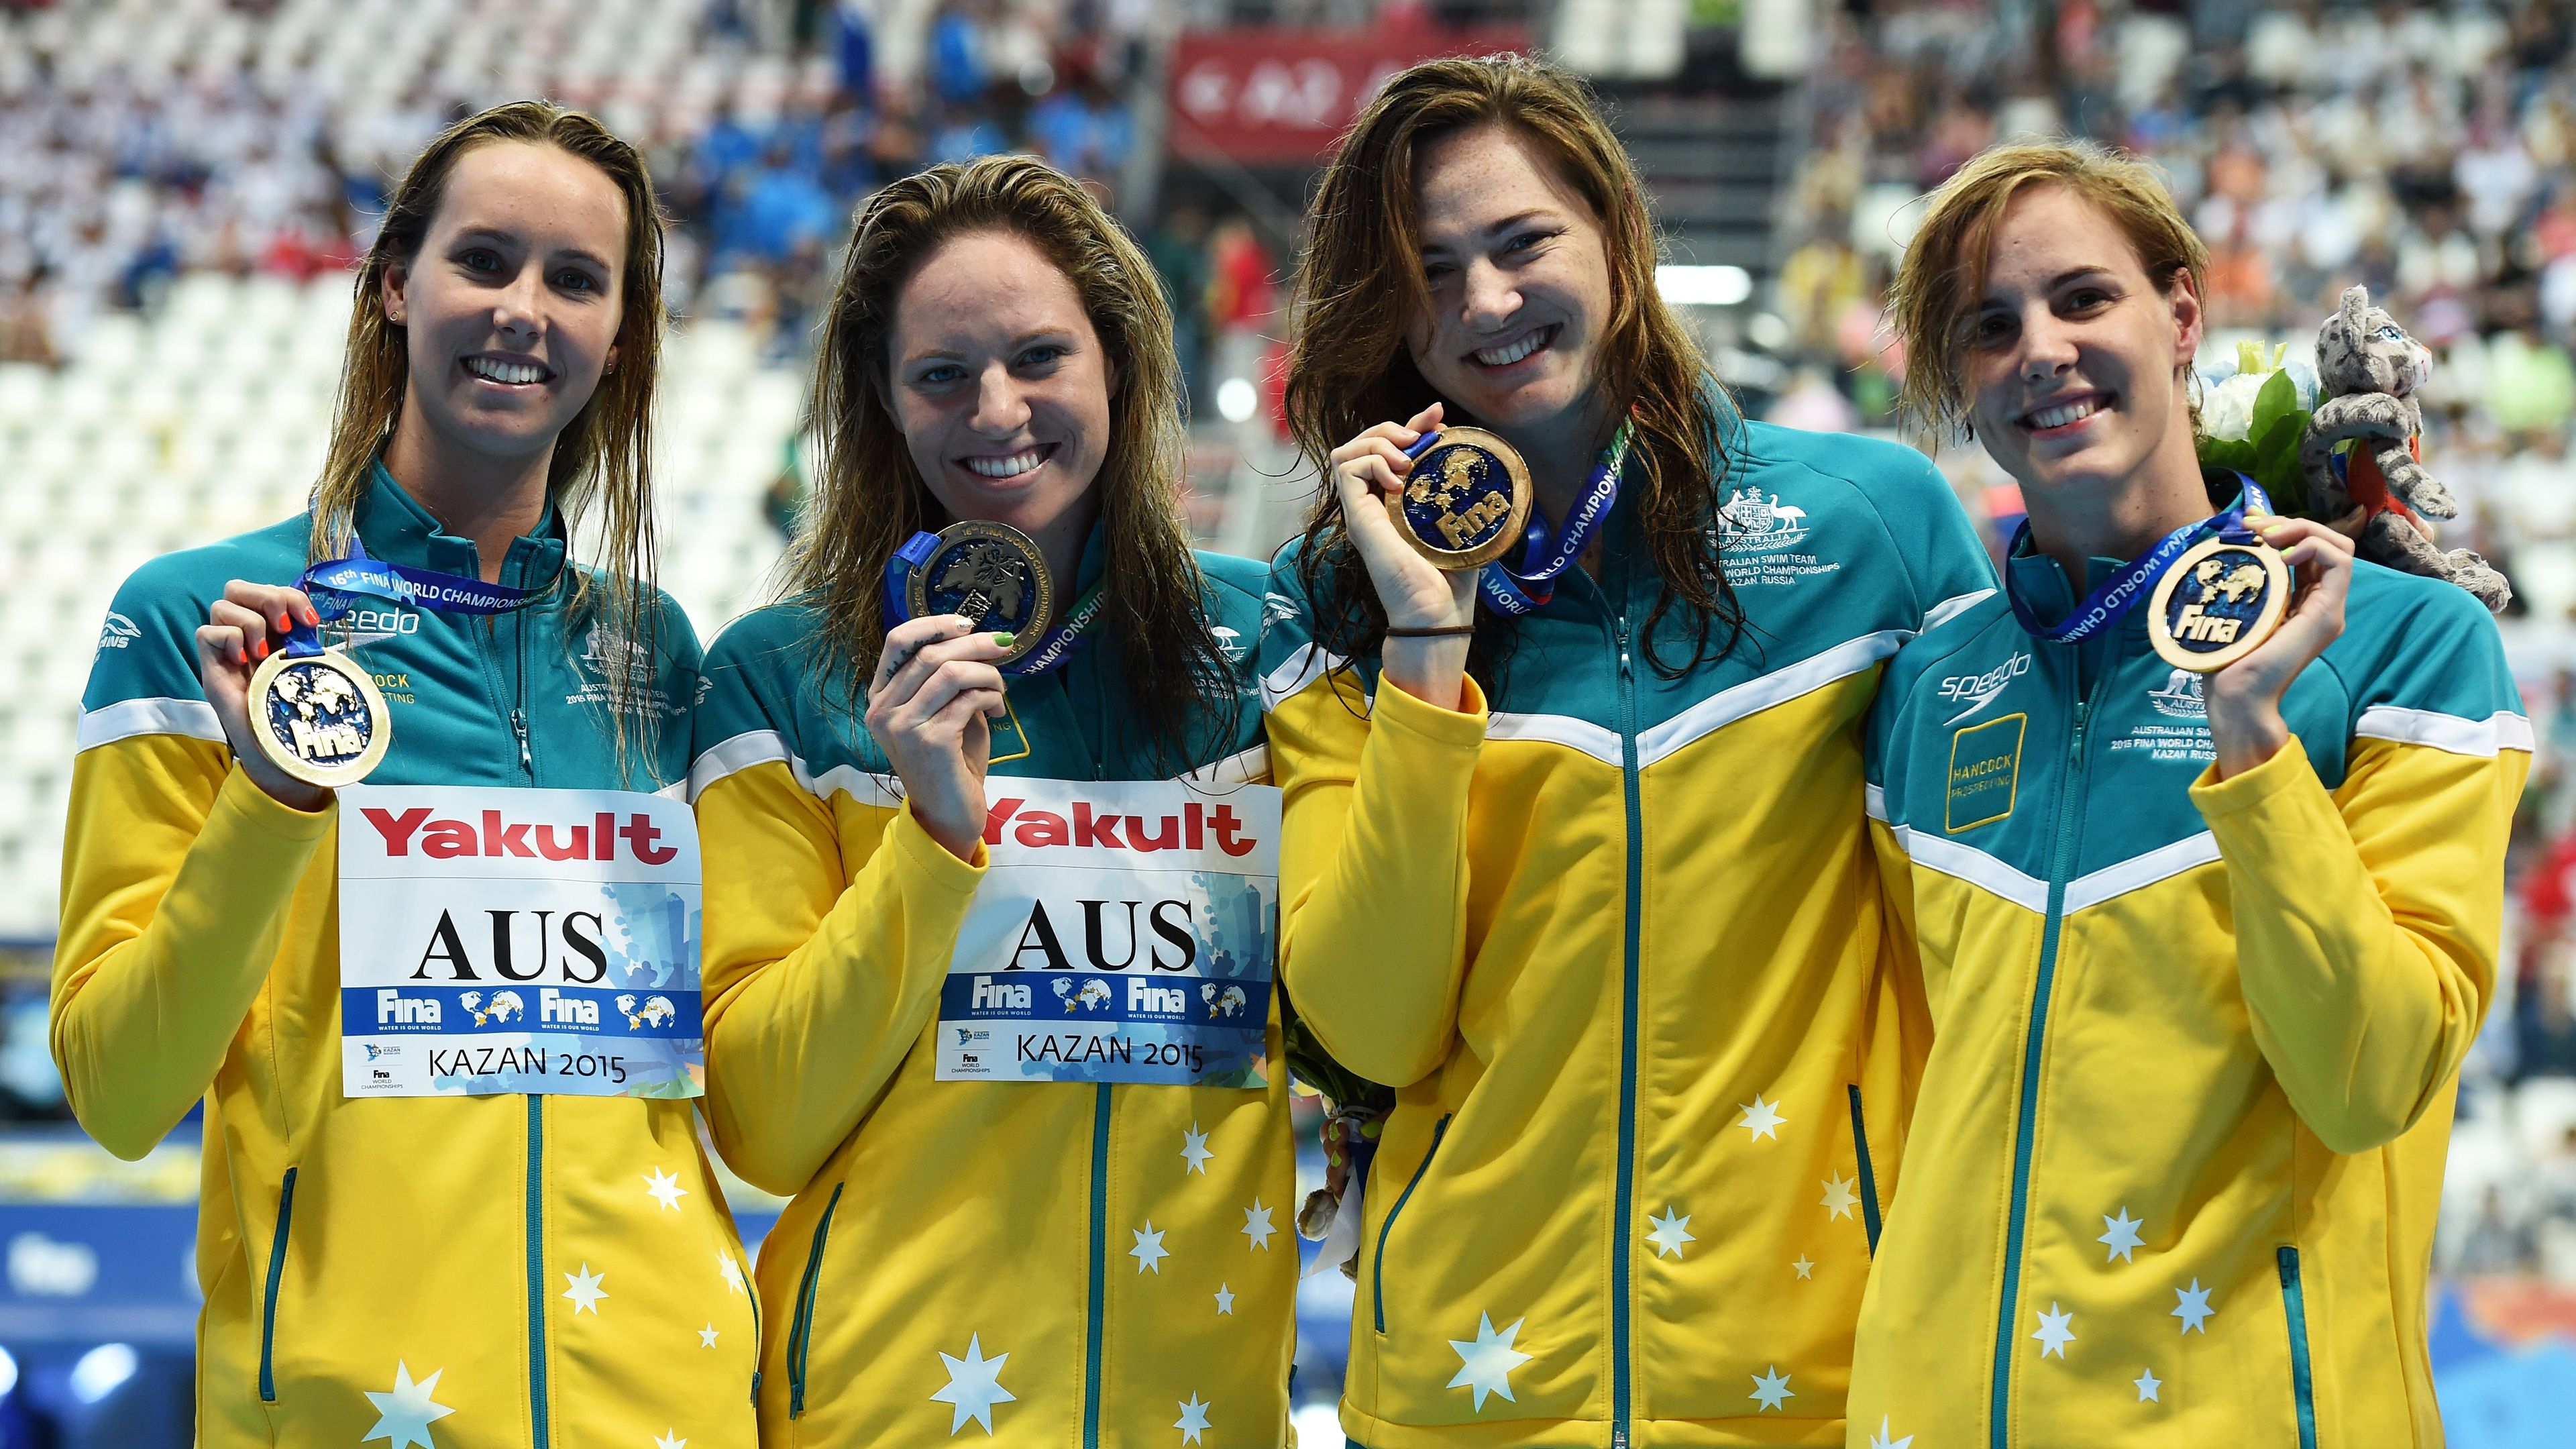 Emily Seebohm relieved swimming can 'be as fair as it can be' under new gender inclusion policy